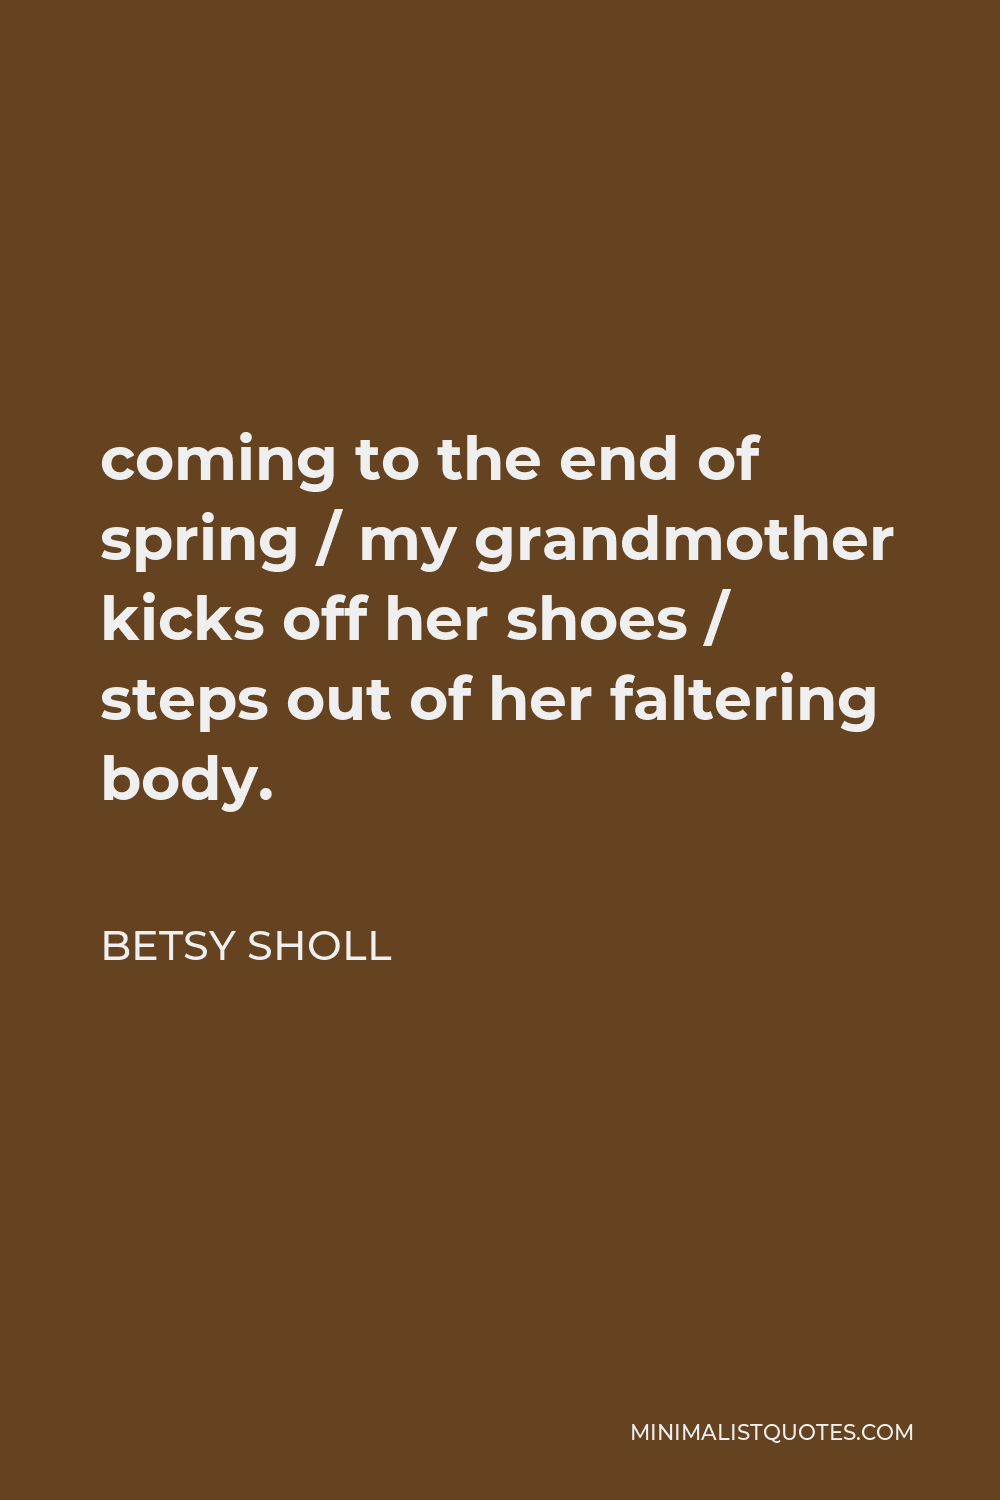 Betsy Sholl Quote - coming to the end of spring / my grandmother kicks off her shoes / steps out of her faltering body.